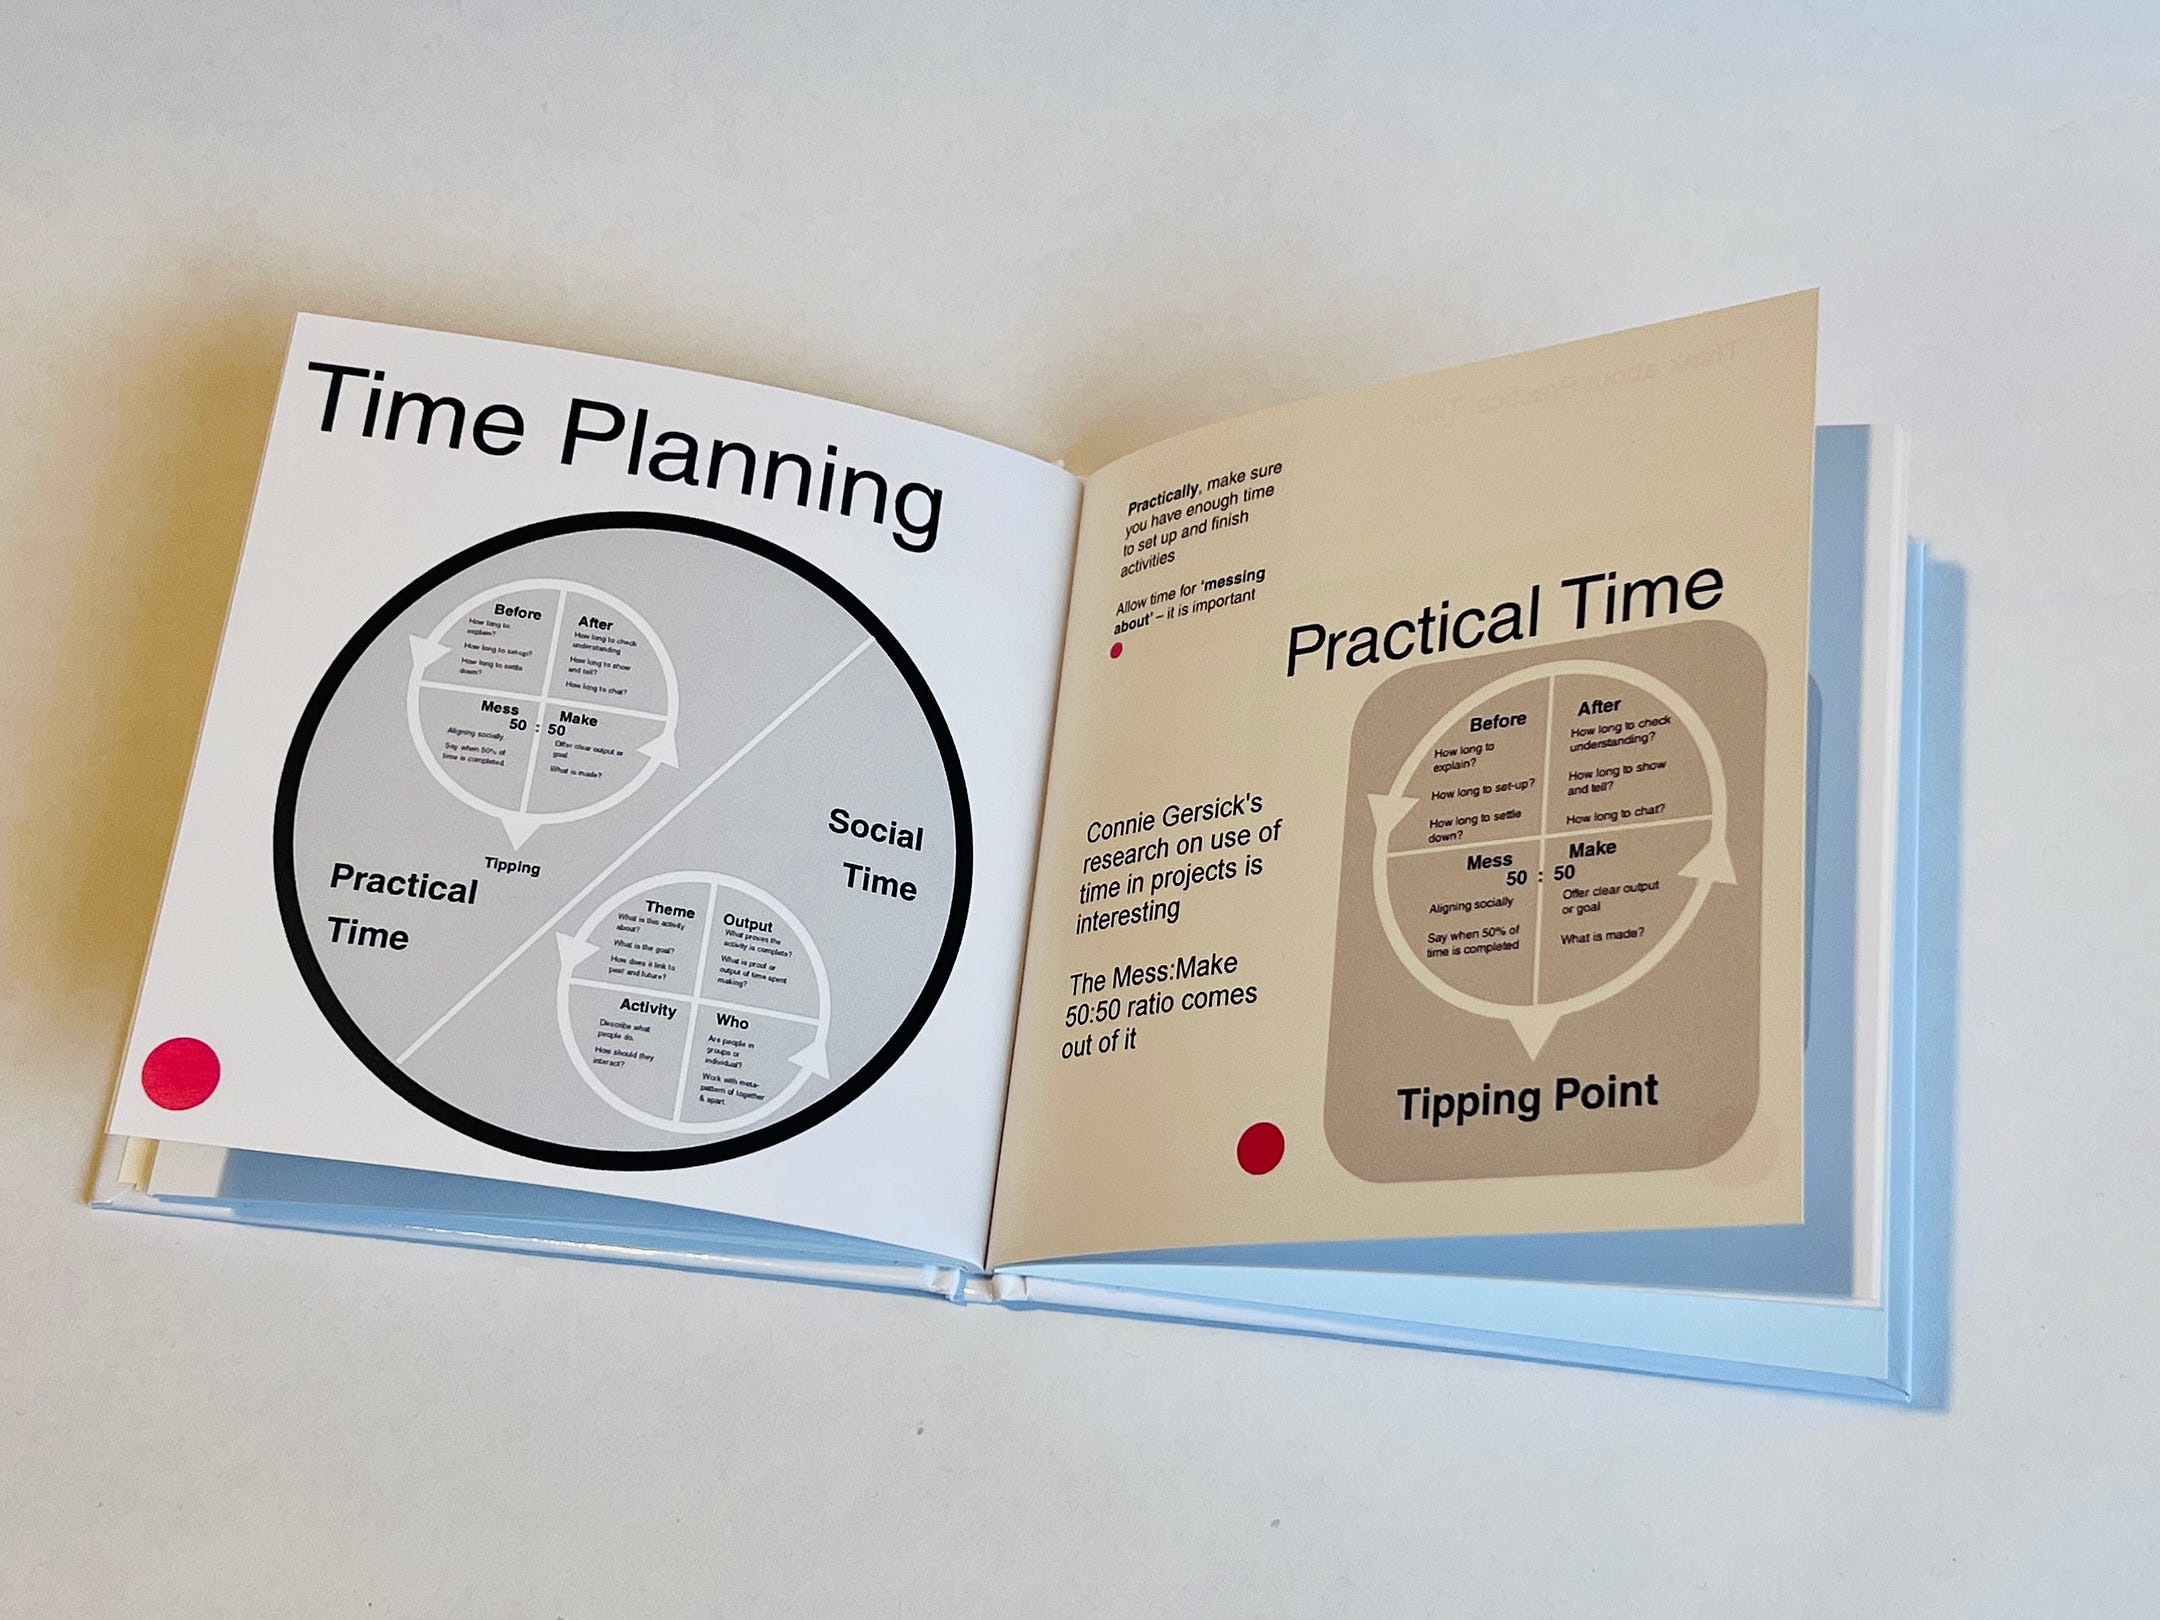 Planning practical time for activities — how to set up, make and feedback in time available